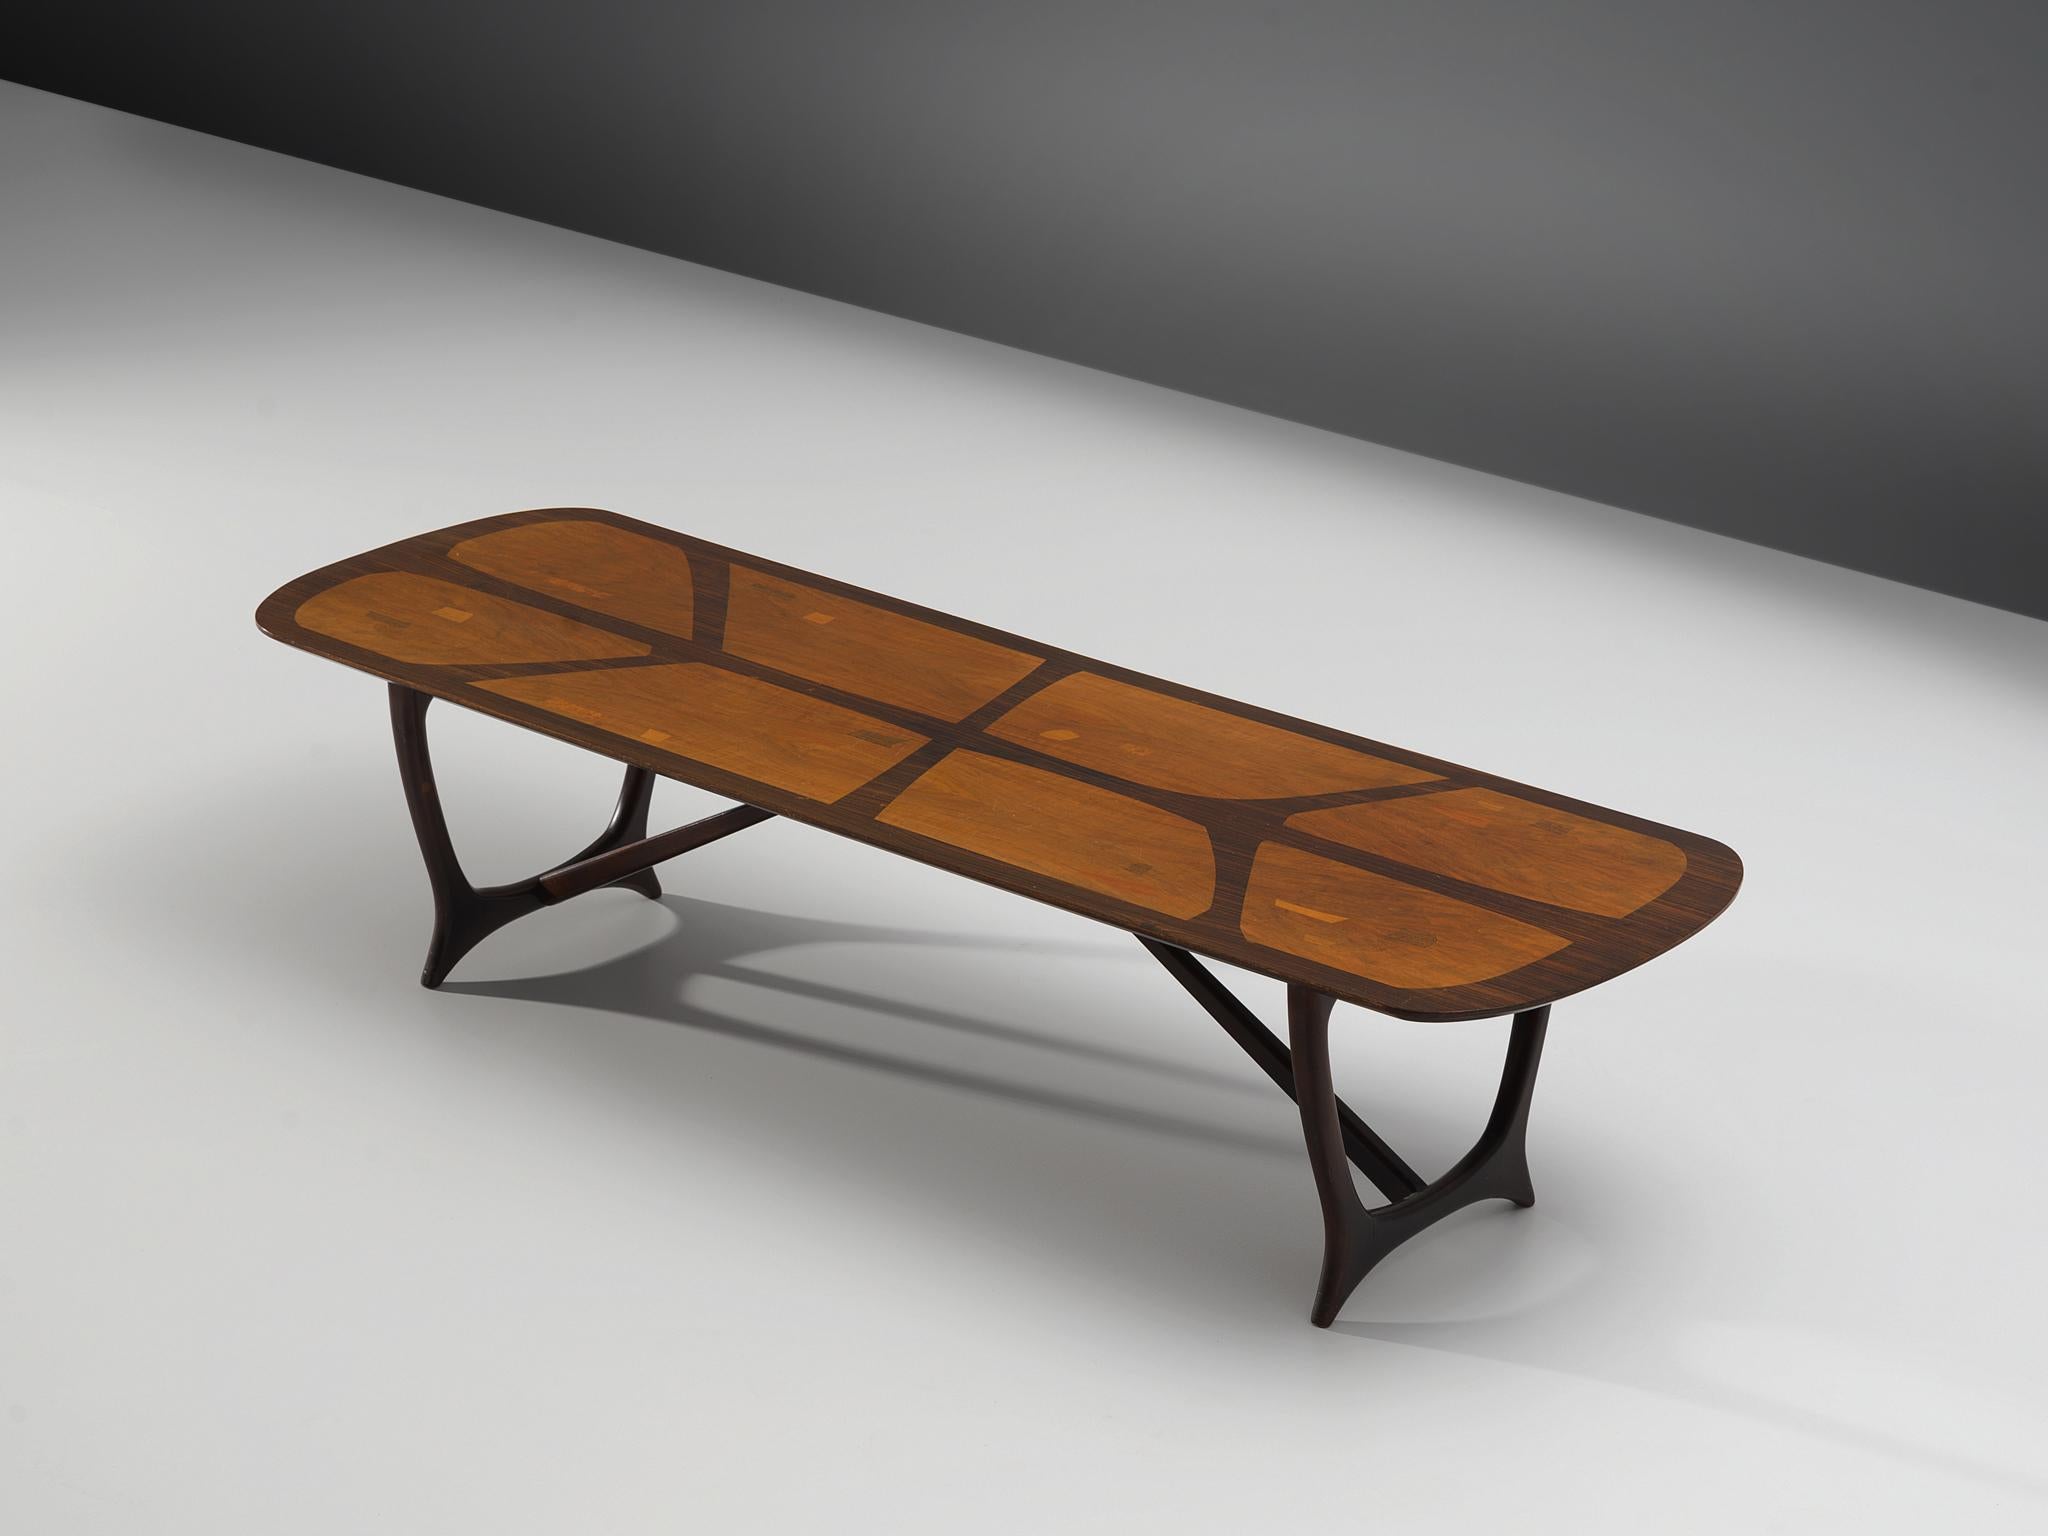 Long coffee table, walnut, rosewood, Italy, 1970s

This extraordinary long table features two pedestal feet that exist of a branch like appearance. The table has a beautiful organic, natural aesthetic by menas of an inlay. A dark rosewood frame